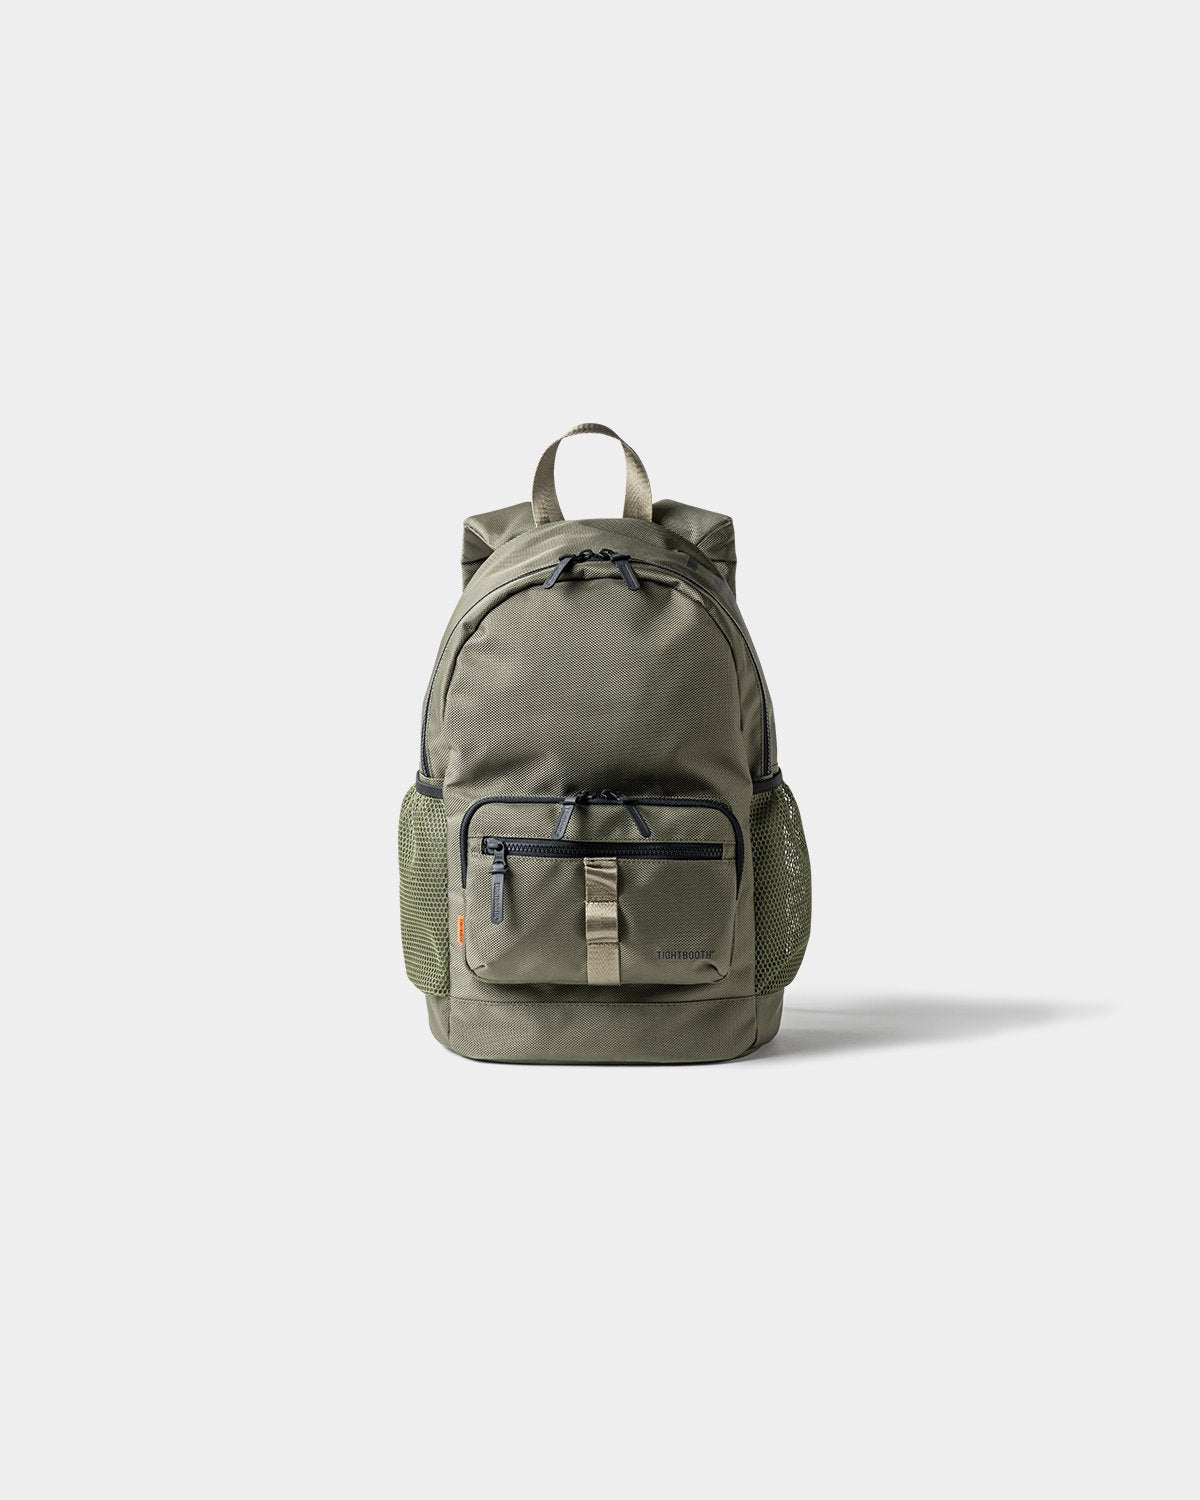 TIGHTBOOTH DAYPACK – unexpected store